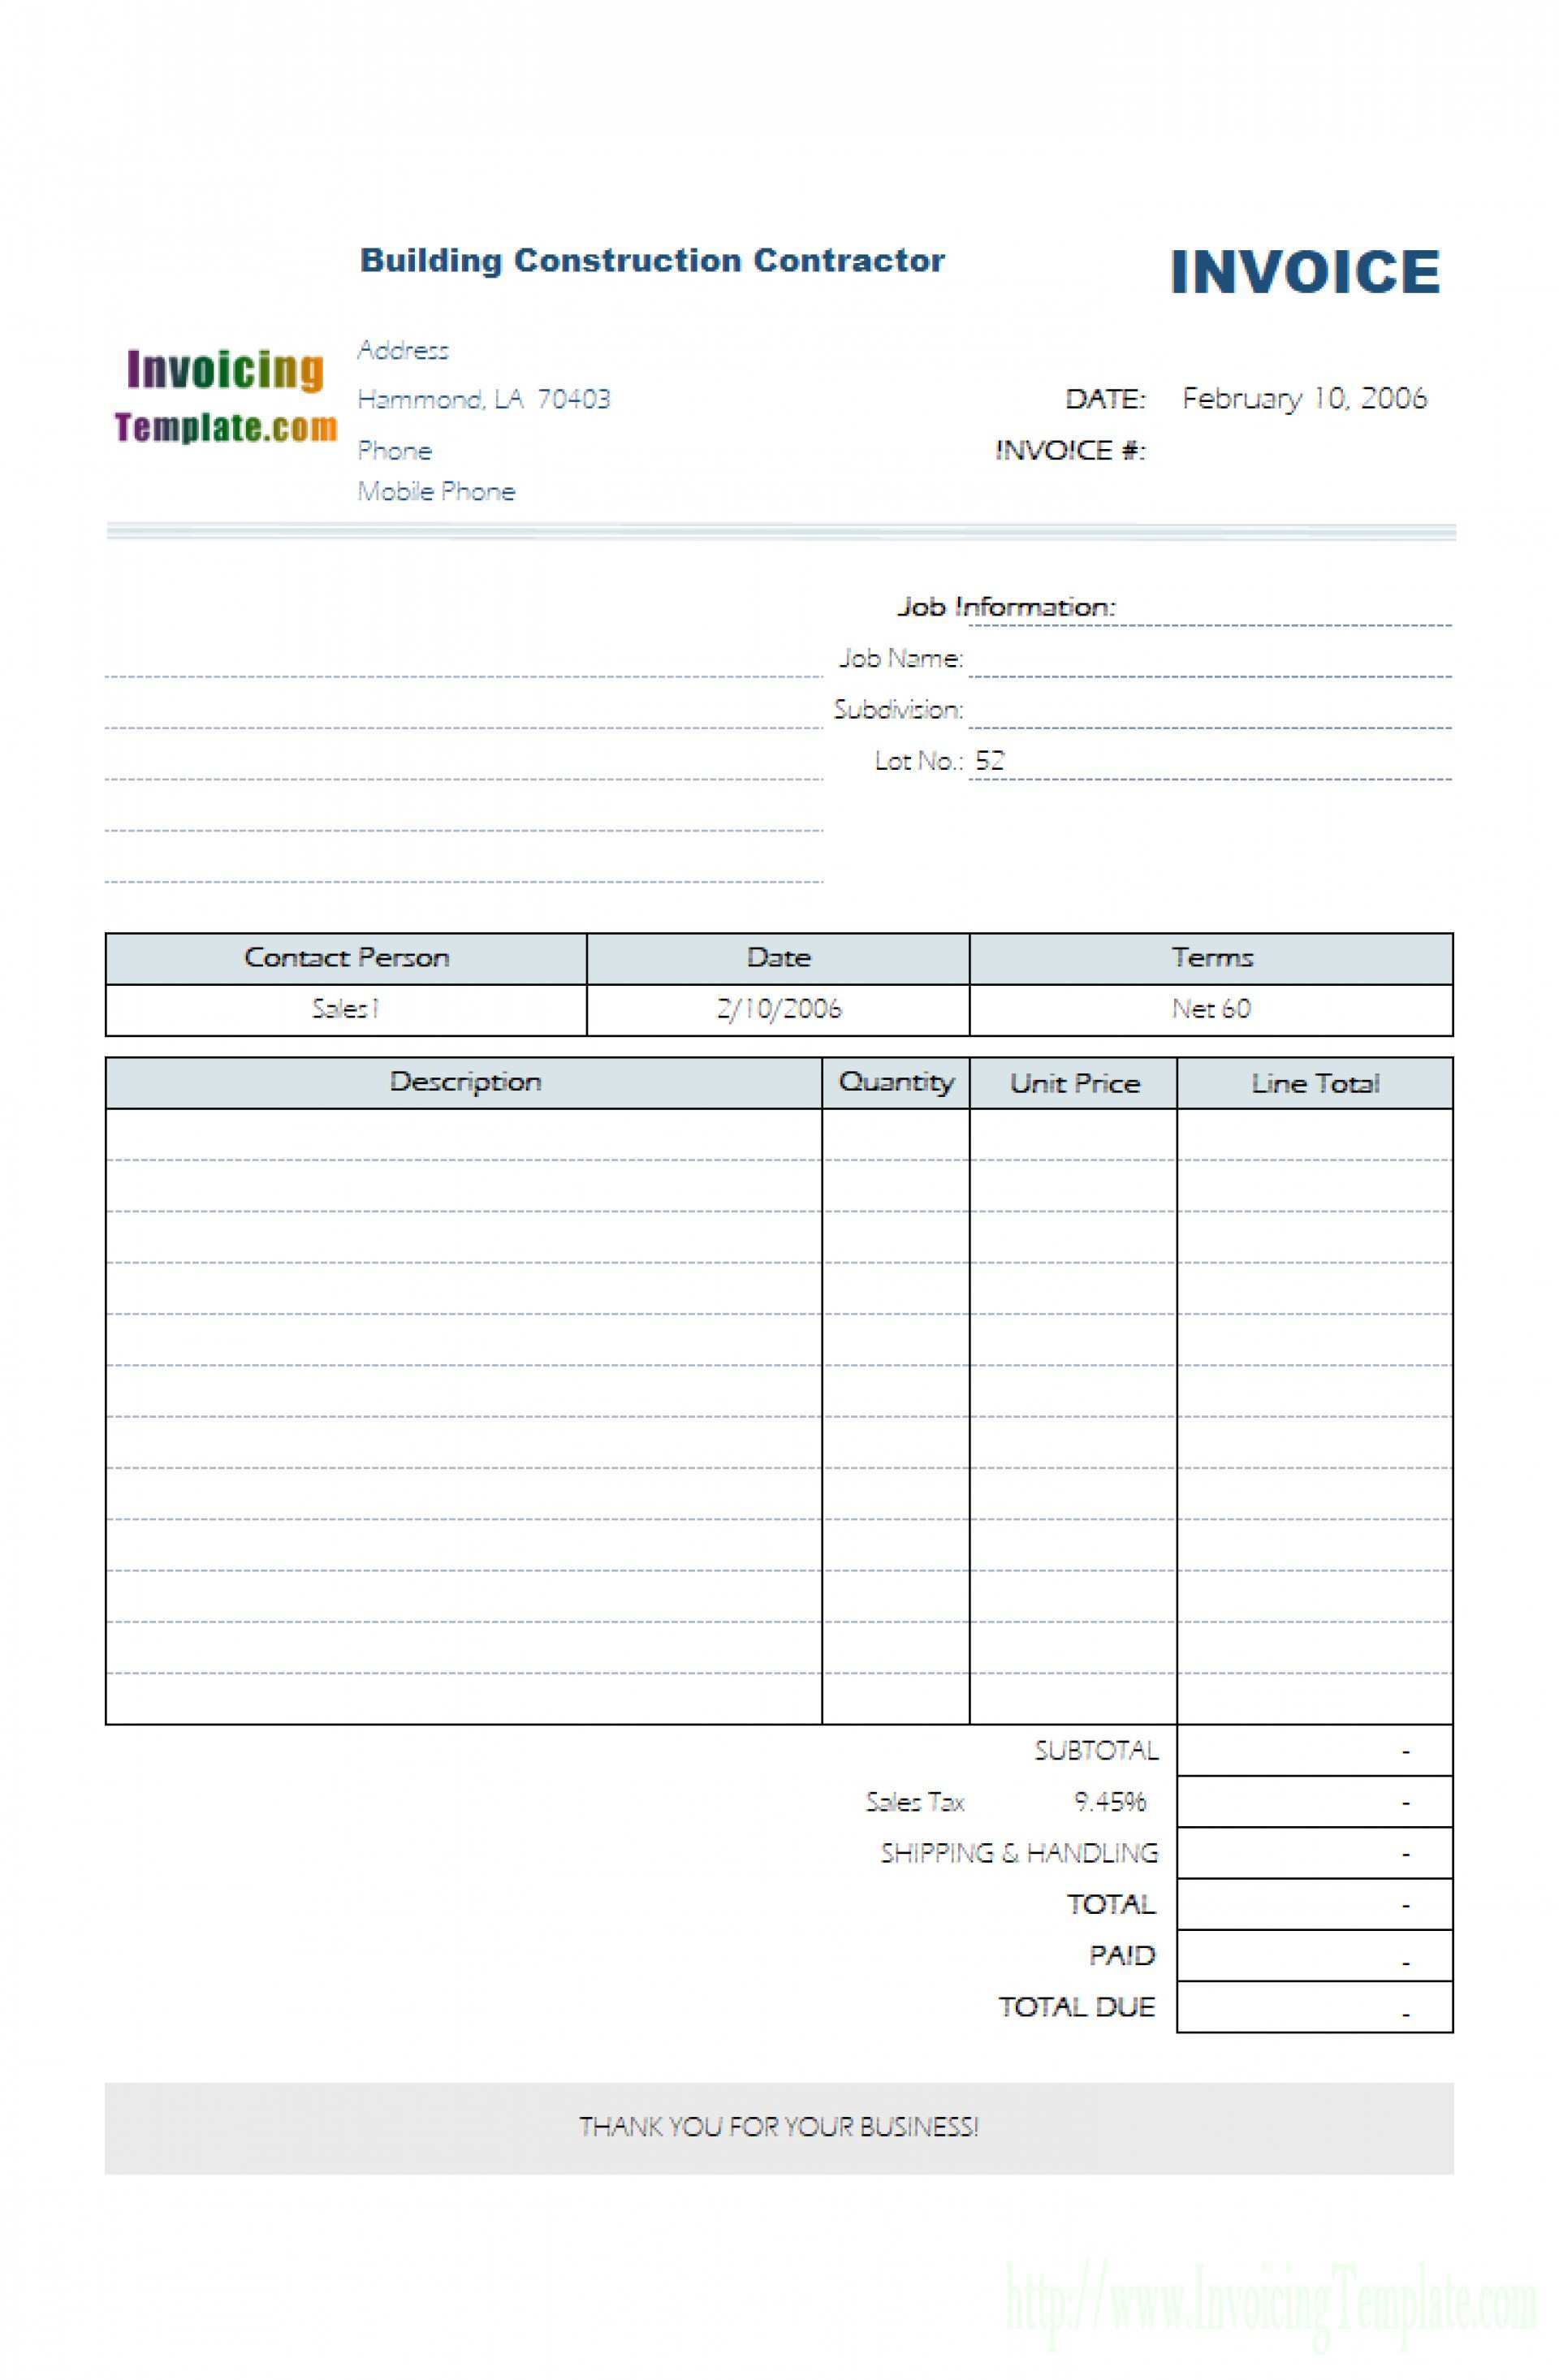 Self Employed Construction Invoice Template - Cards Design Templates